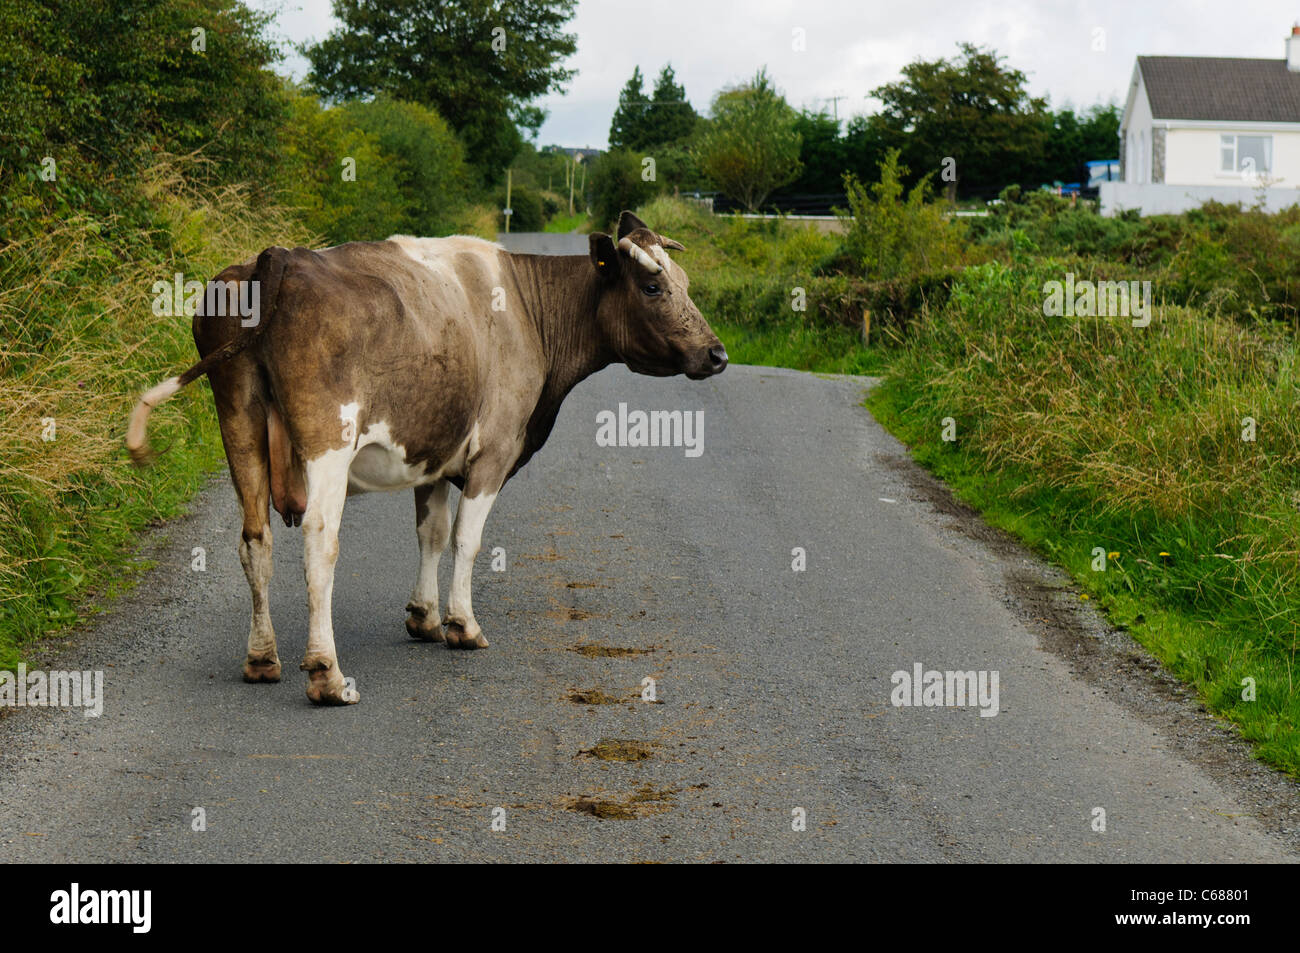 Cow in the middle of a country road Stock Photo